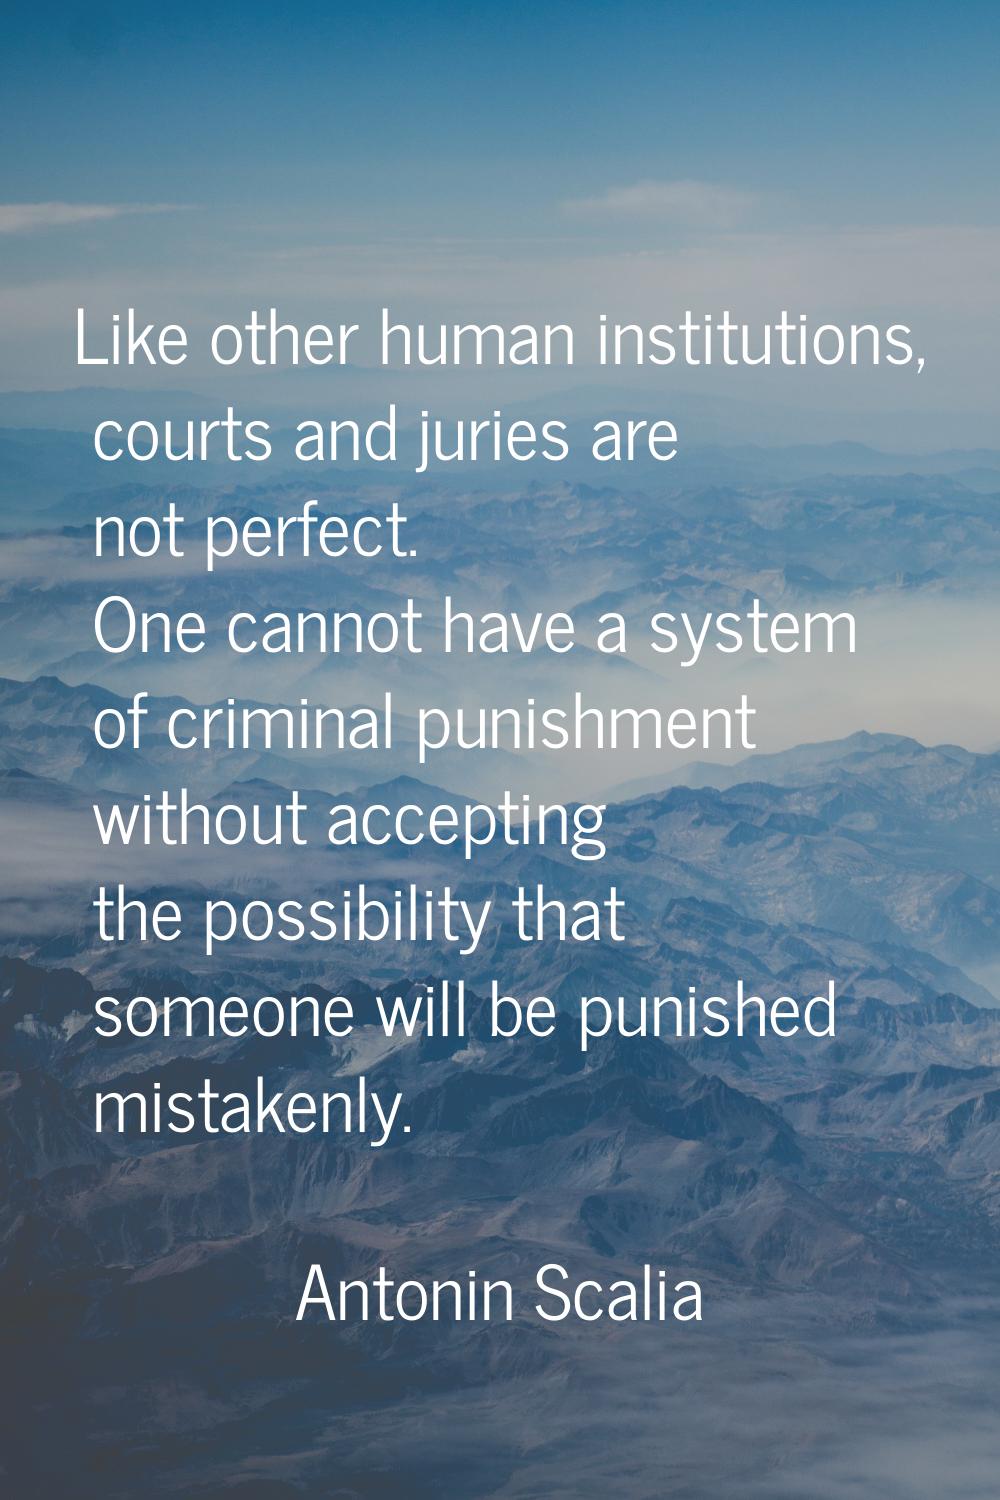 Like other human institutions, courts and juries are not perfect. One cannot have a system of crimi